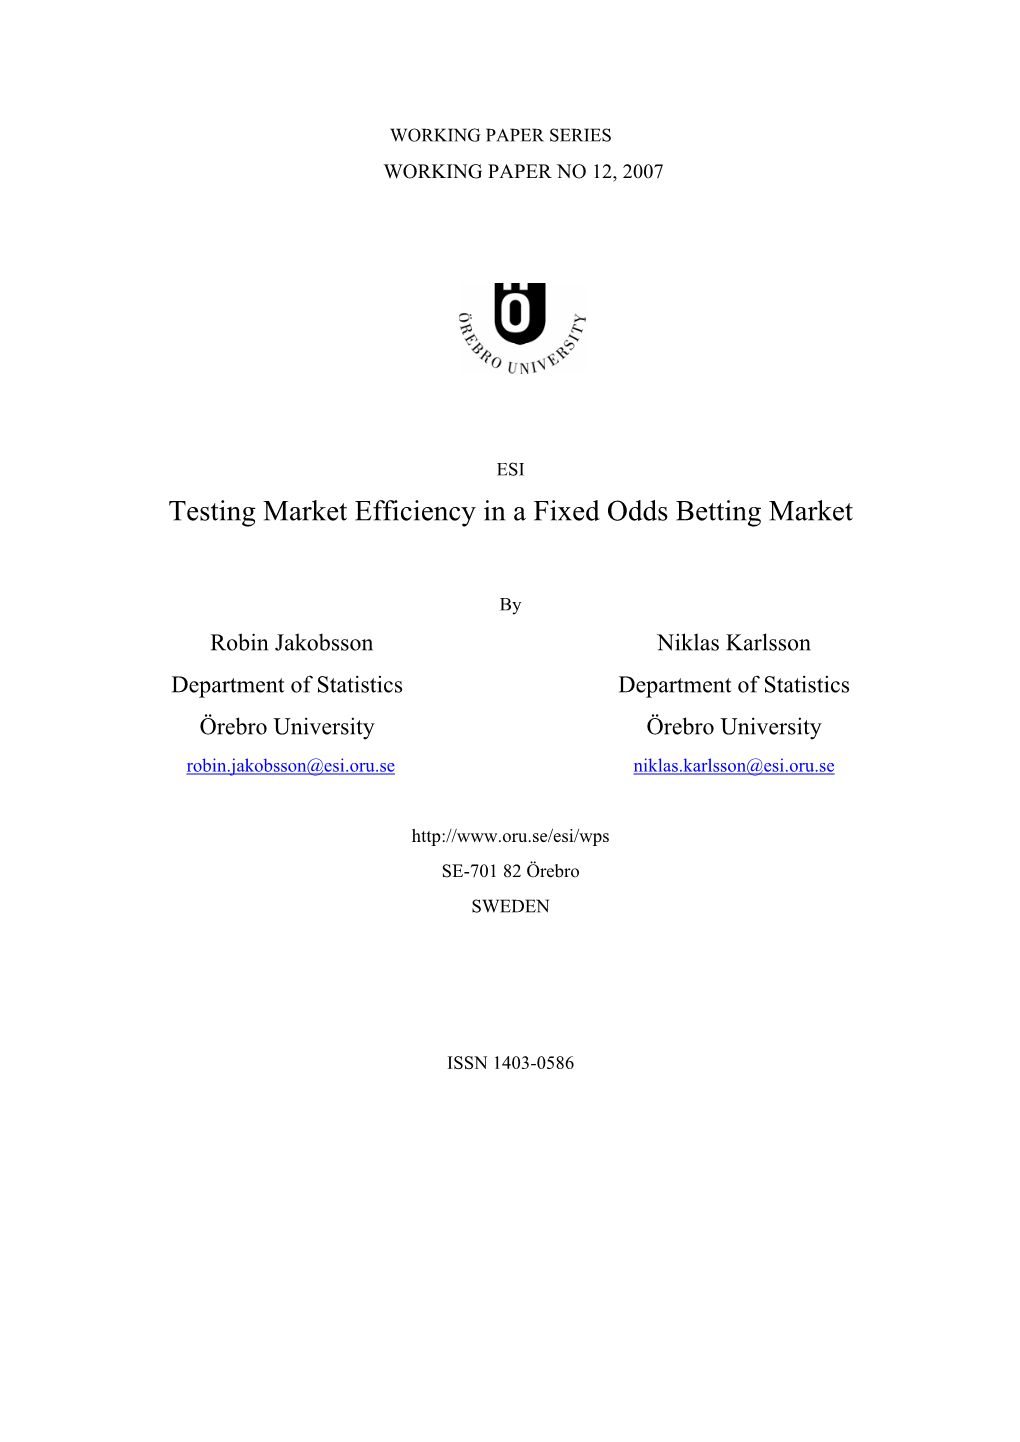 Testing Market Efficiency in a Fixed Odds Betting Market